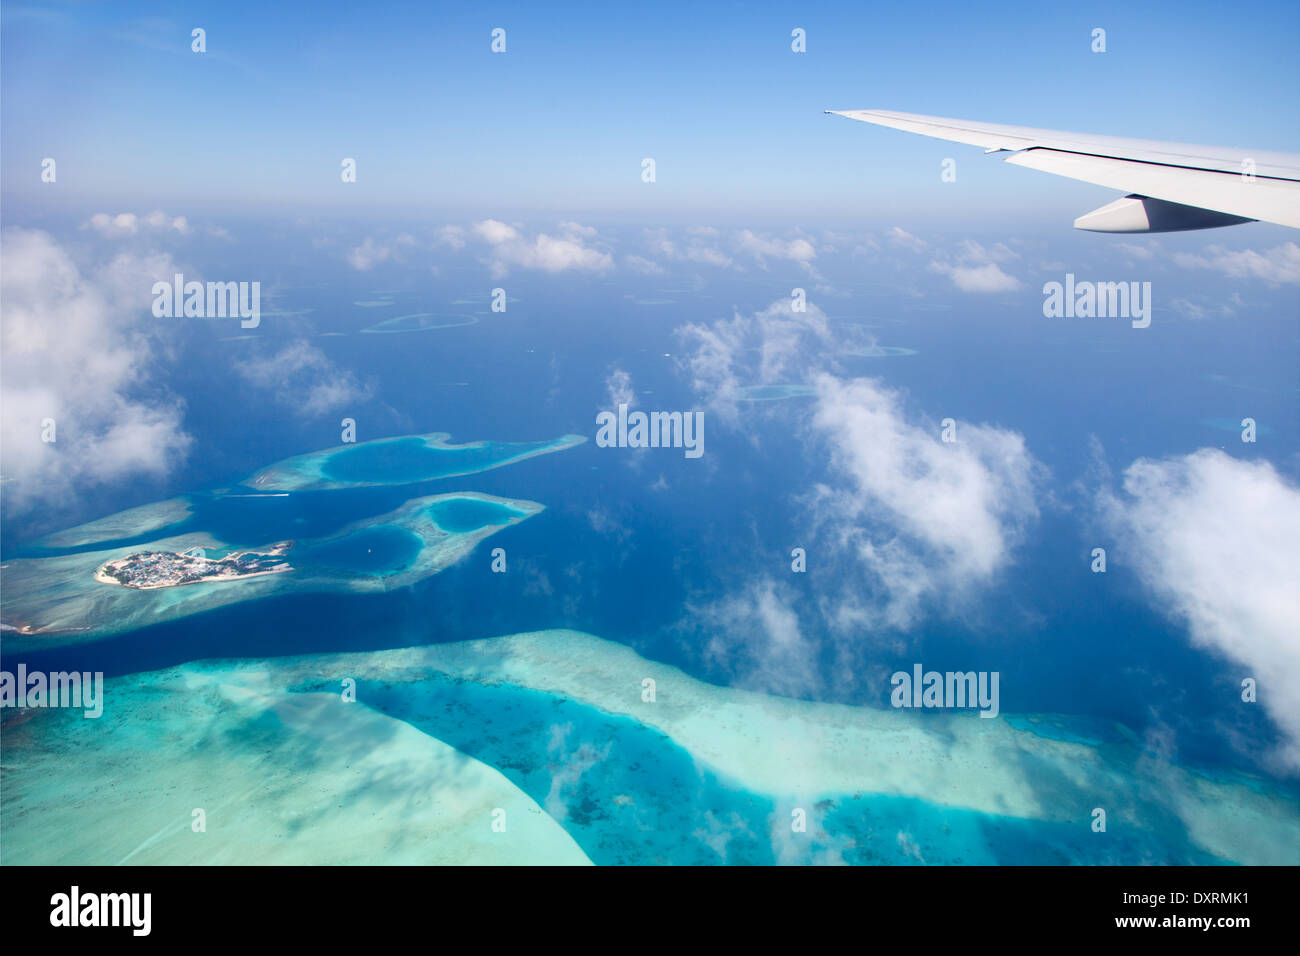 View from the window of an airplane flying above the Maldive Islands in the Indian Ocean 8 Stock Photo